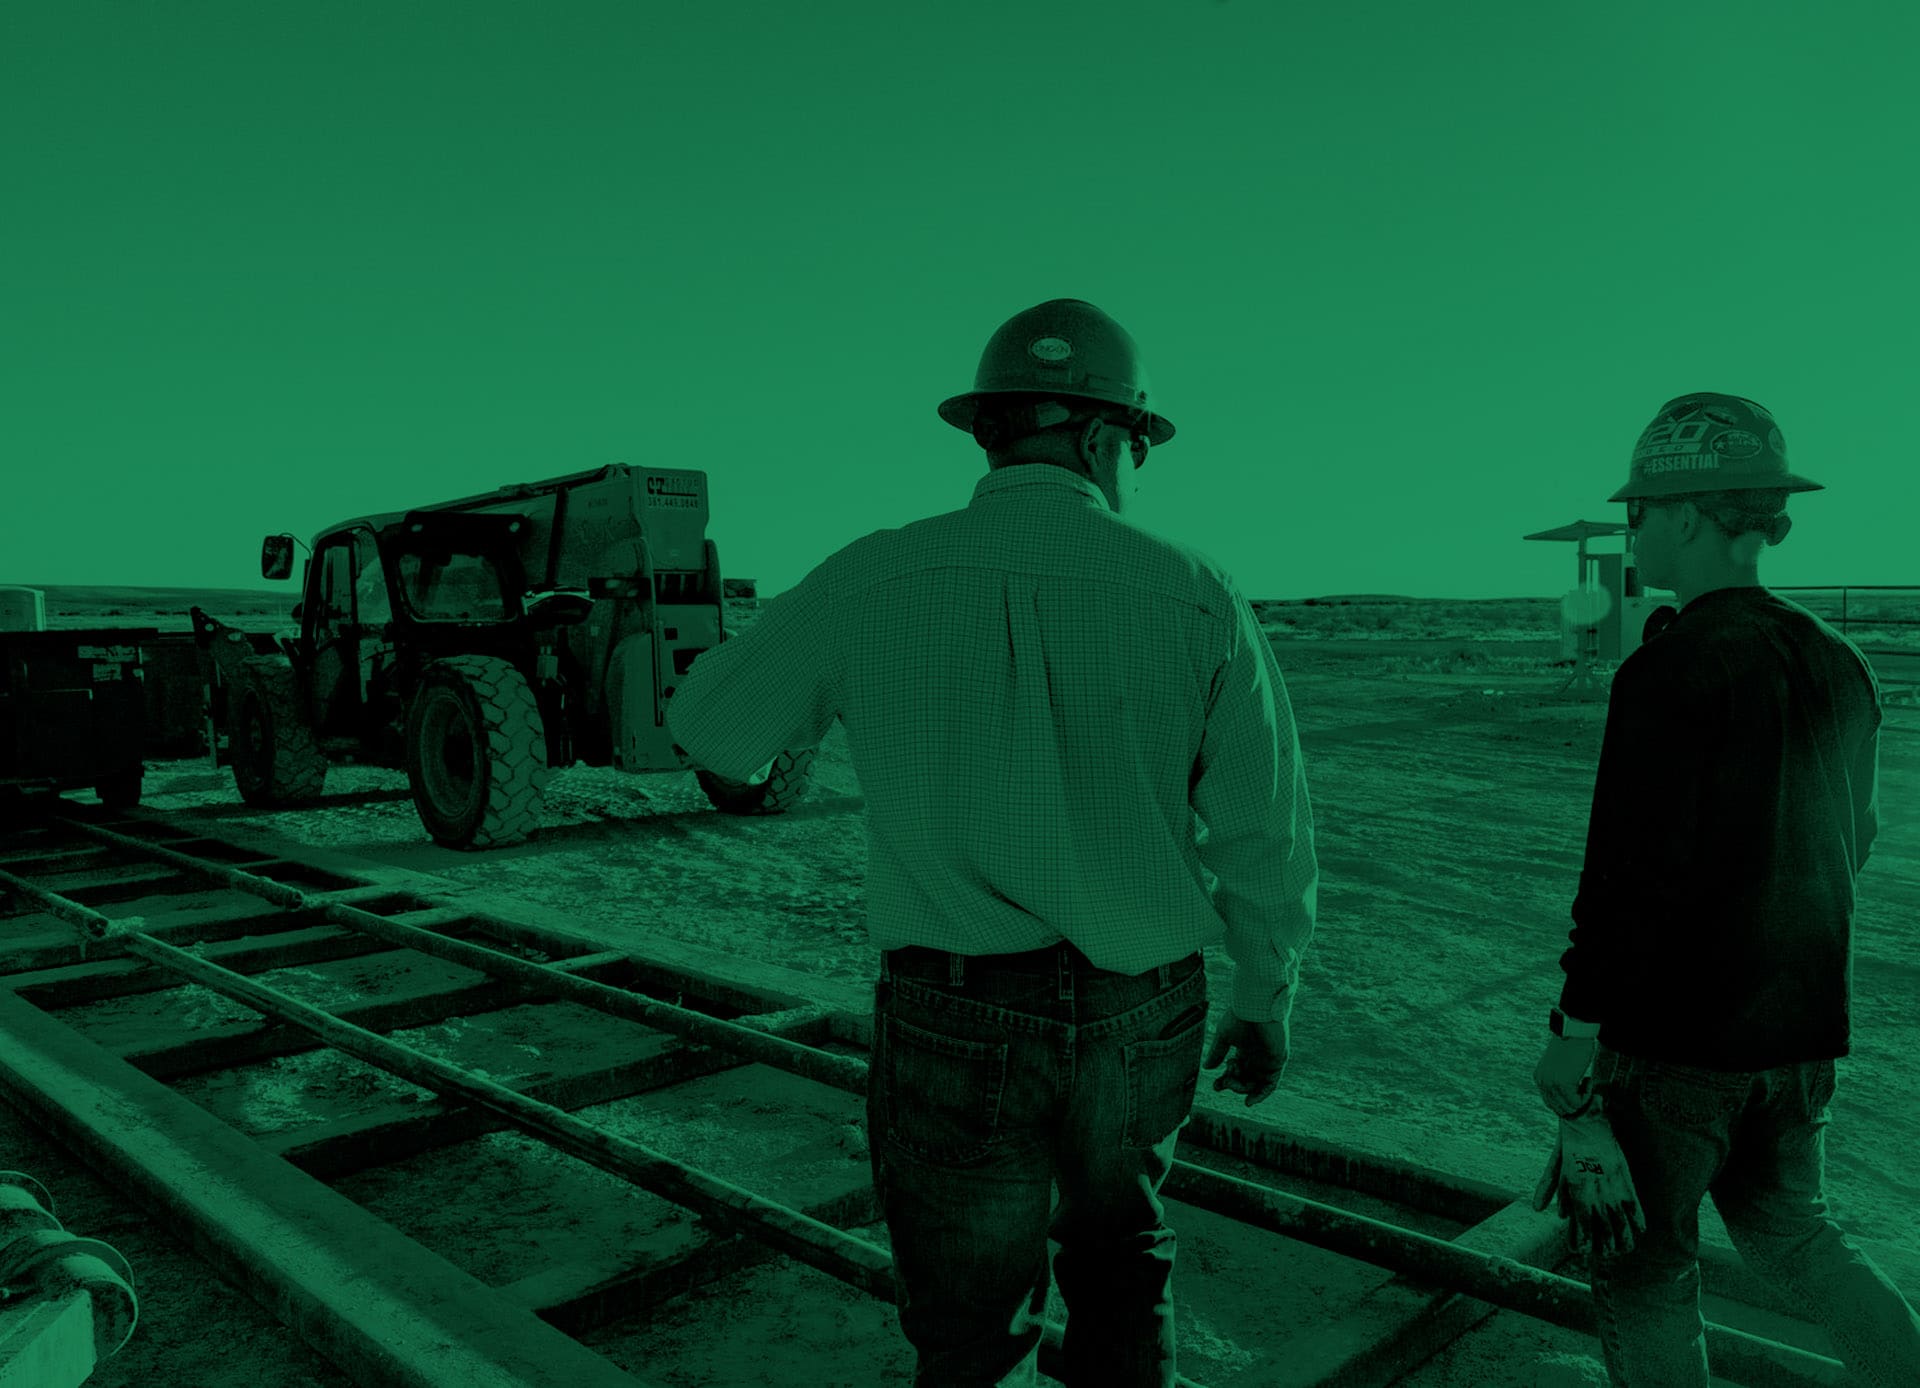 Two professionals from Tornado Production Services, viewed from behind, walk towards operational equipment at a well pad site. One carries gloves, indicative of their readiness for hands-on work in drill-out and clean-out operations, against the backdrop of a clear blue sky at dawn.